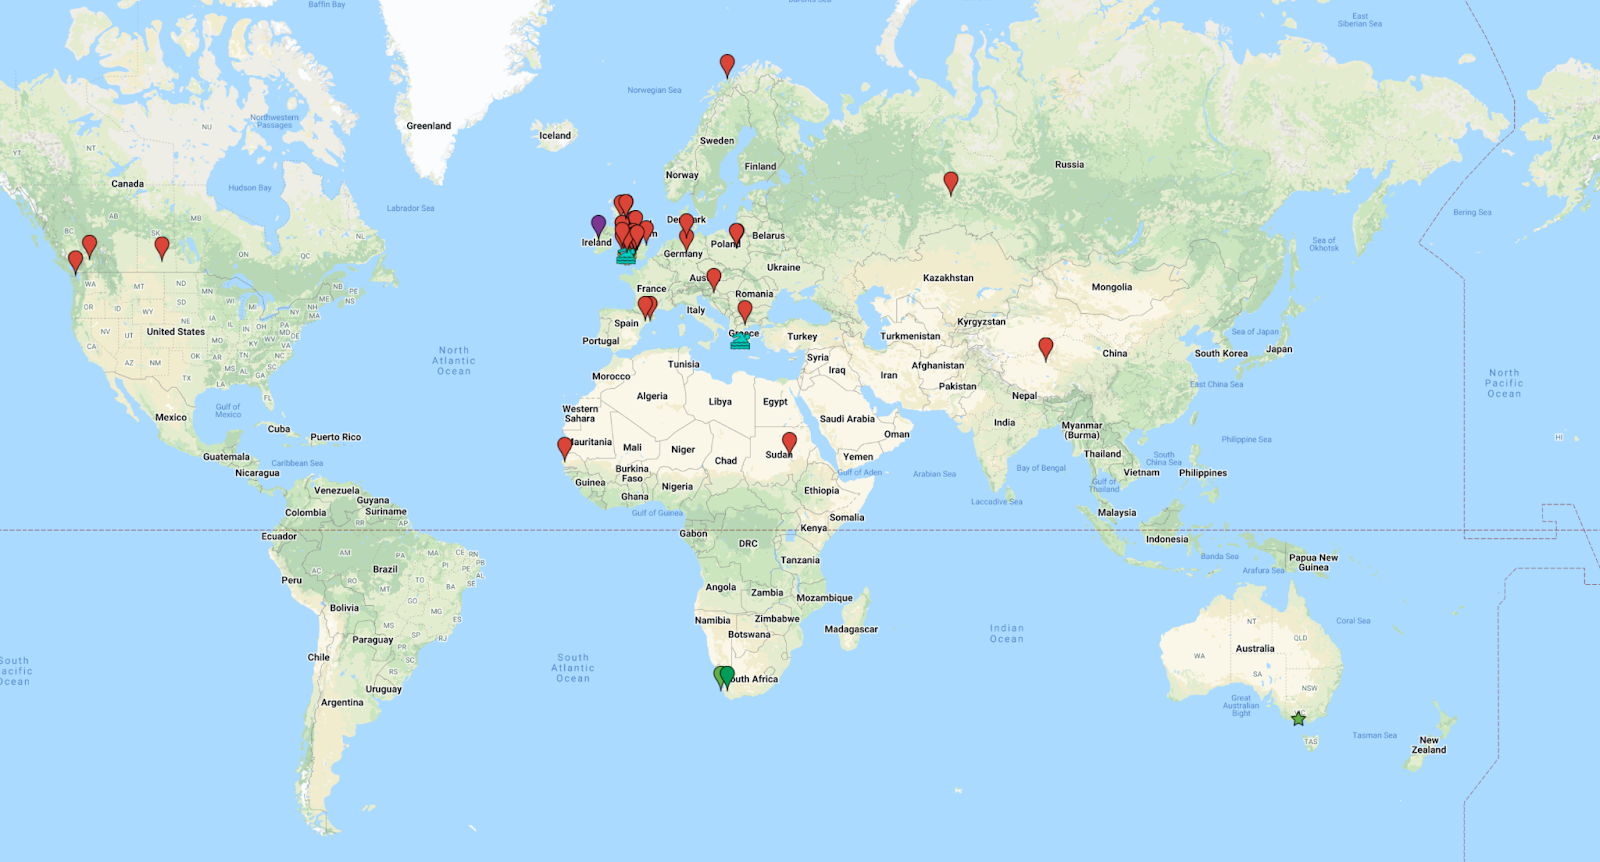 OER15 Participants depicted on a map